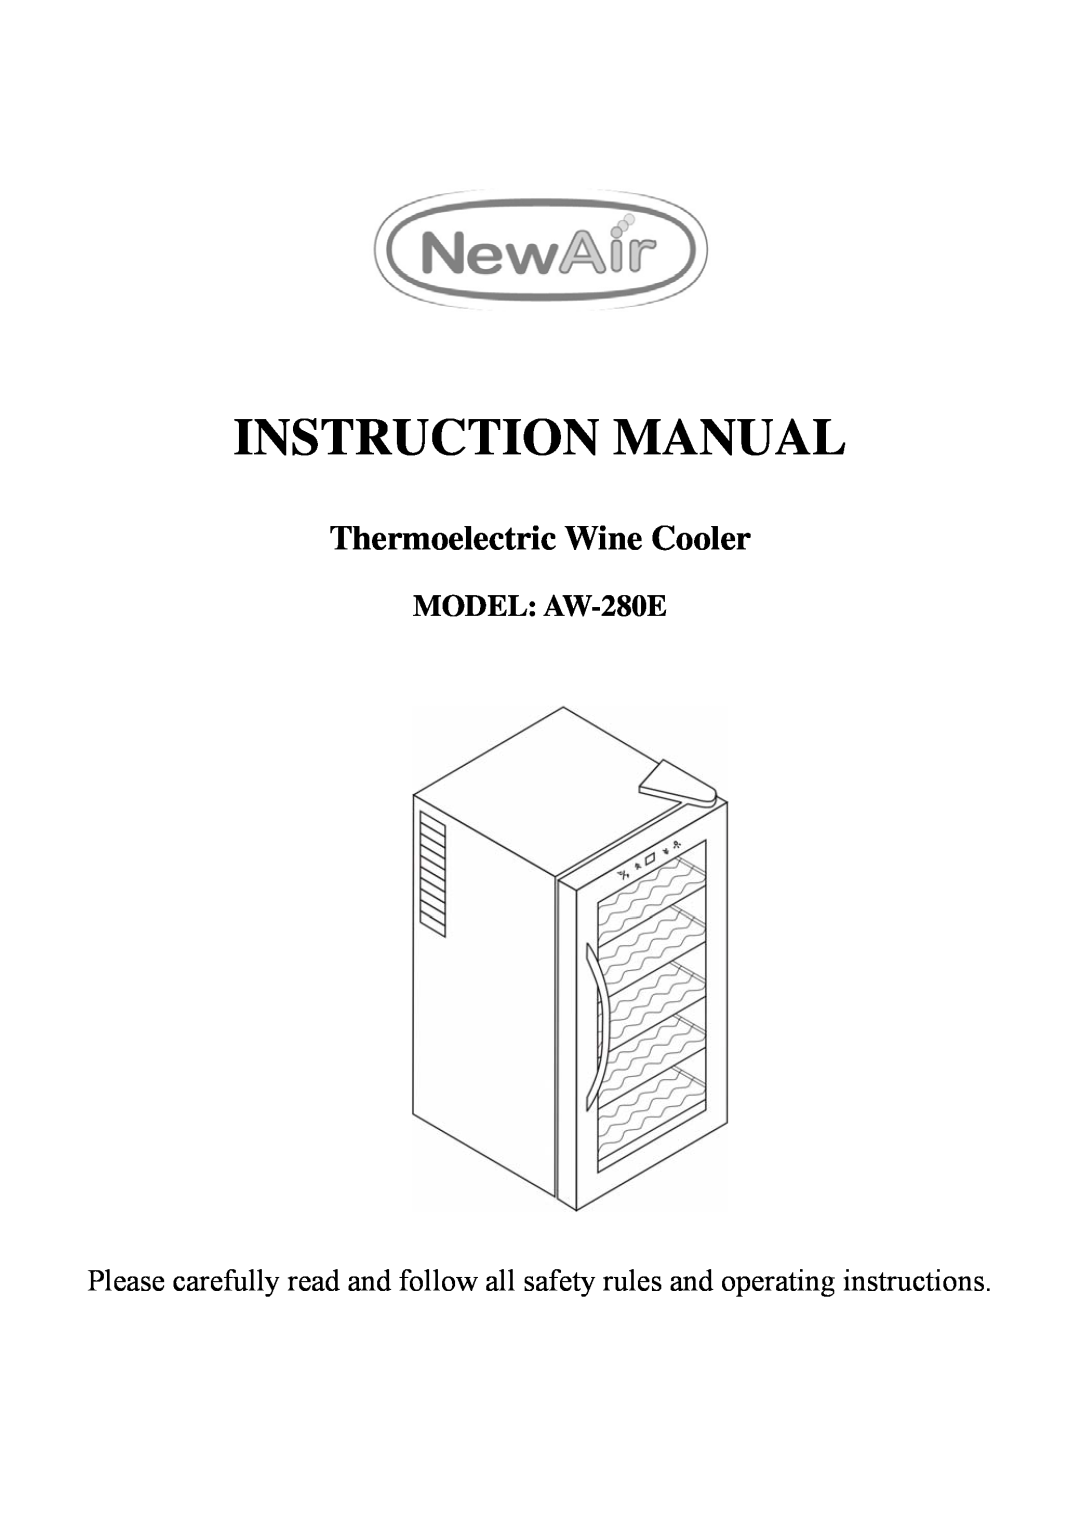 NewAir instruction manual MODEL AW-280E, Thermoelectric Wine Cooler 